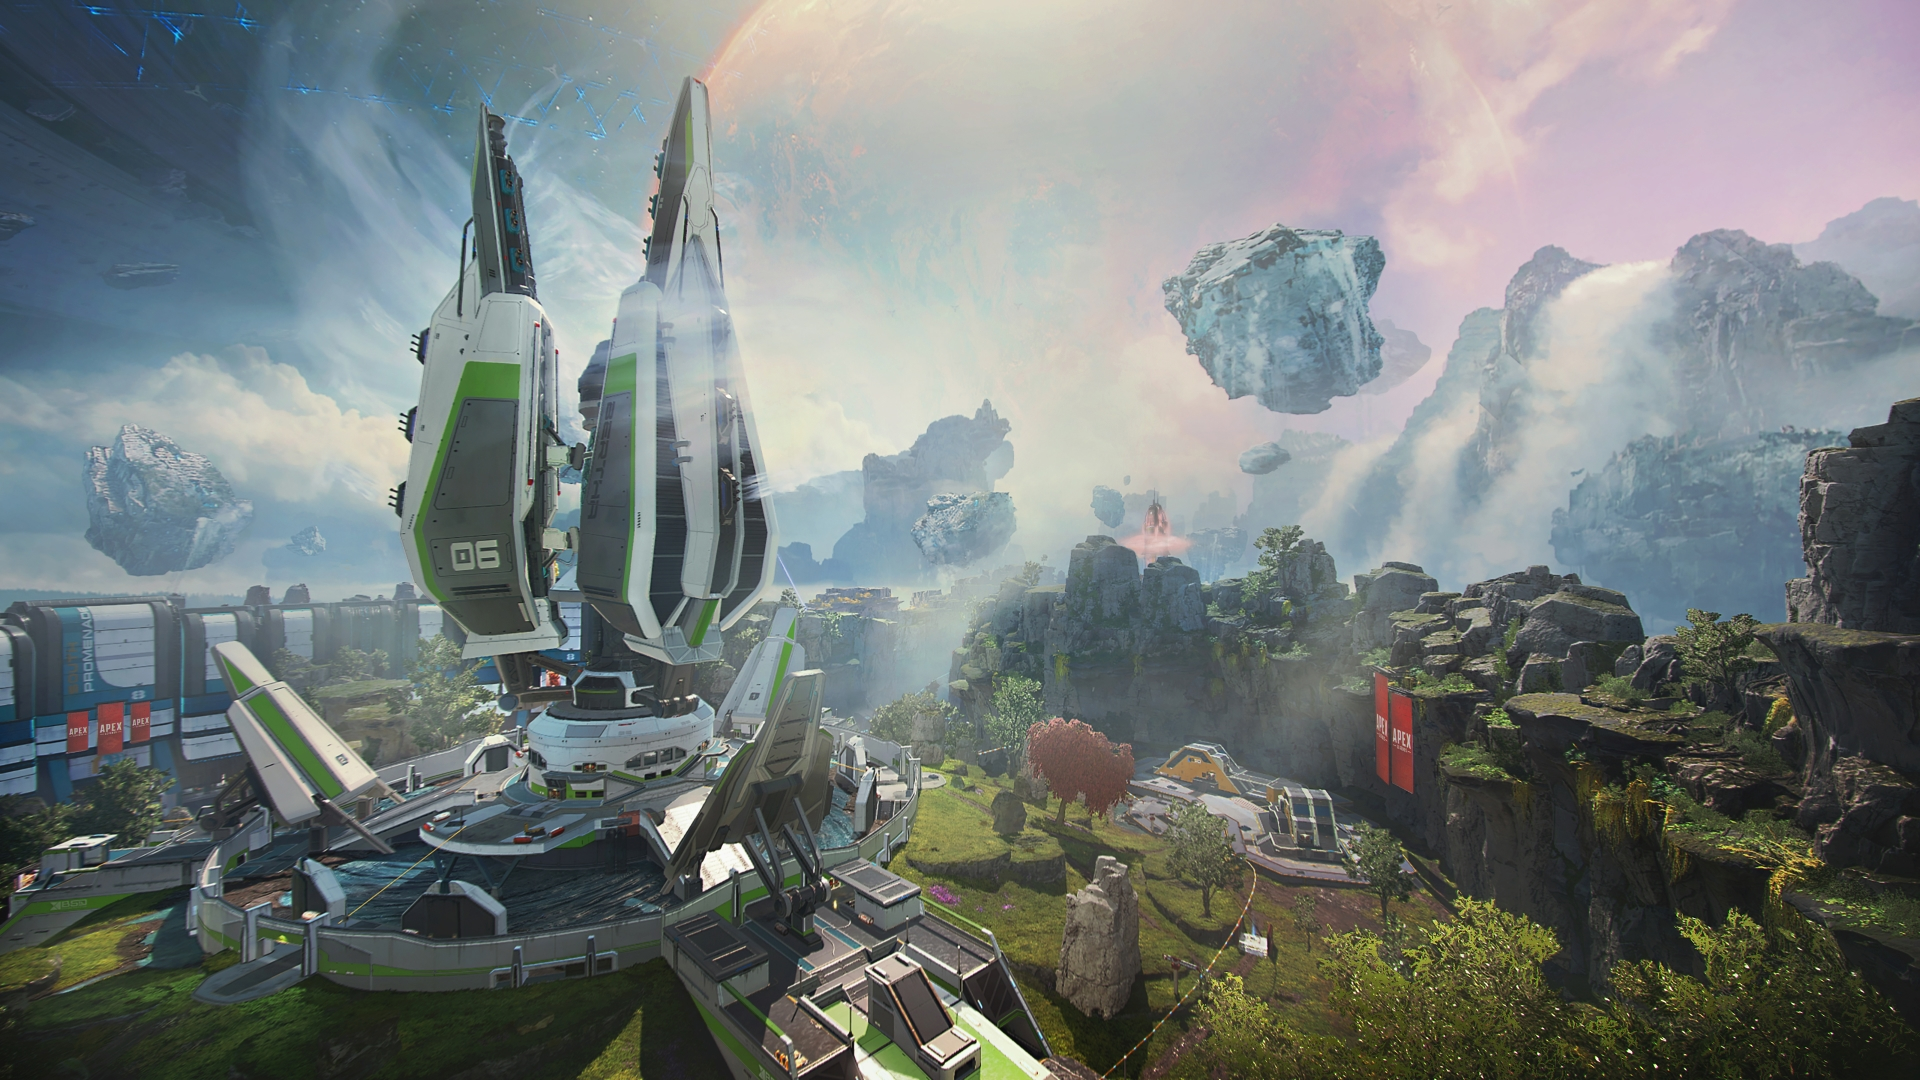 Apex Legends Broken Moon map takes us to Catalyst's home in Season 15: green land with sci-fi building on it